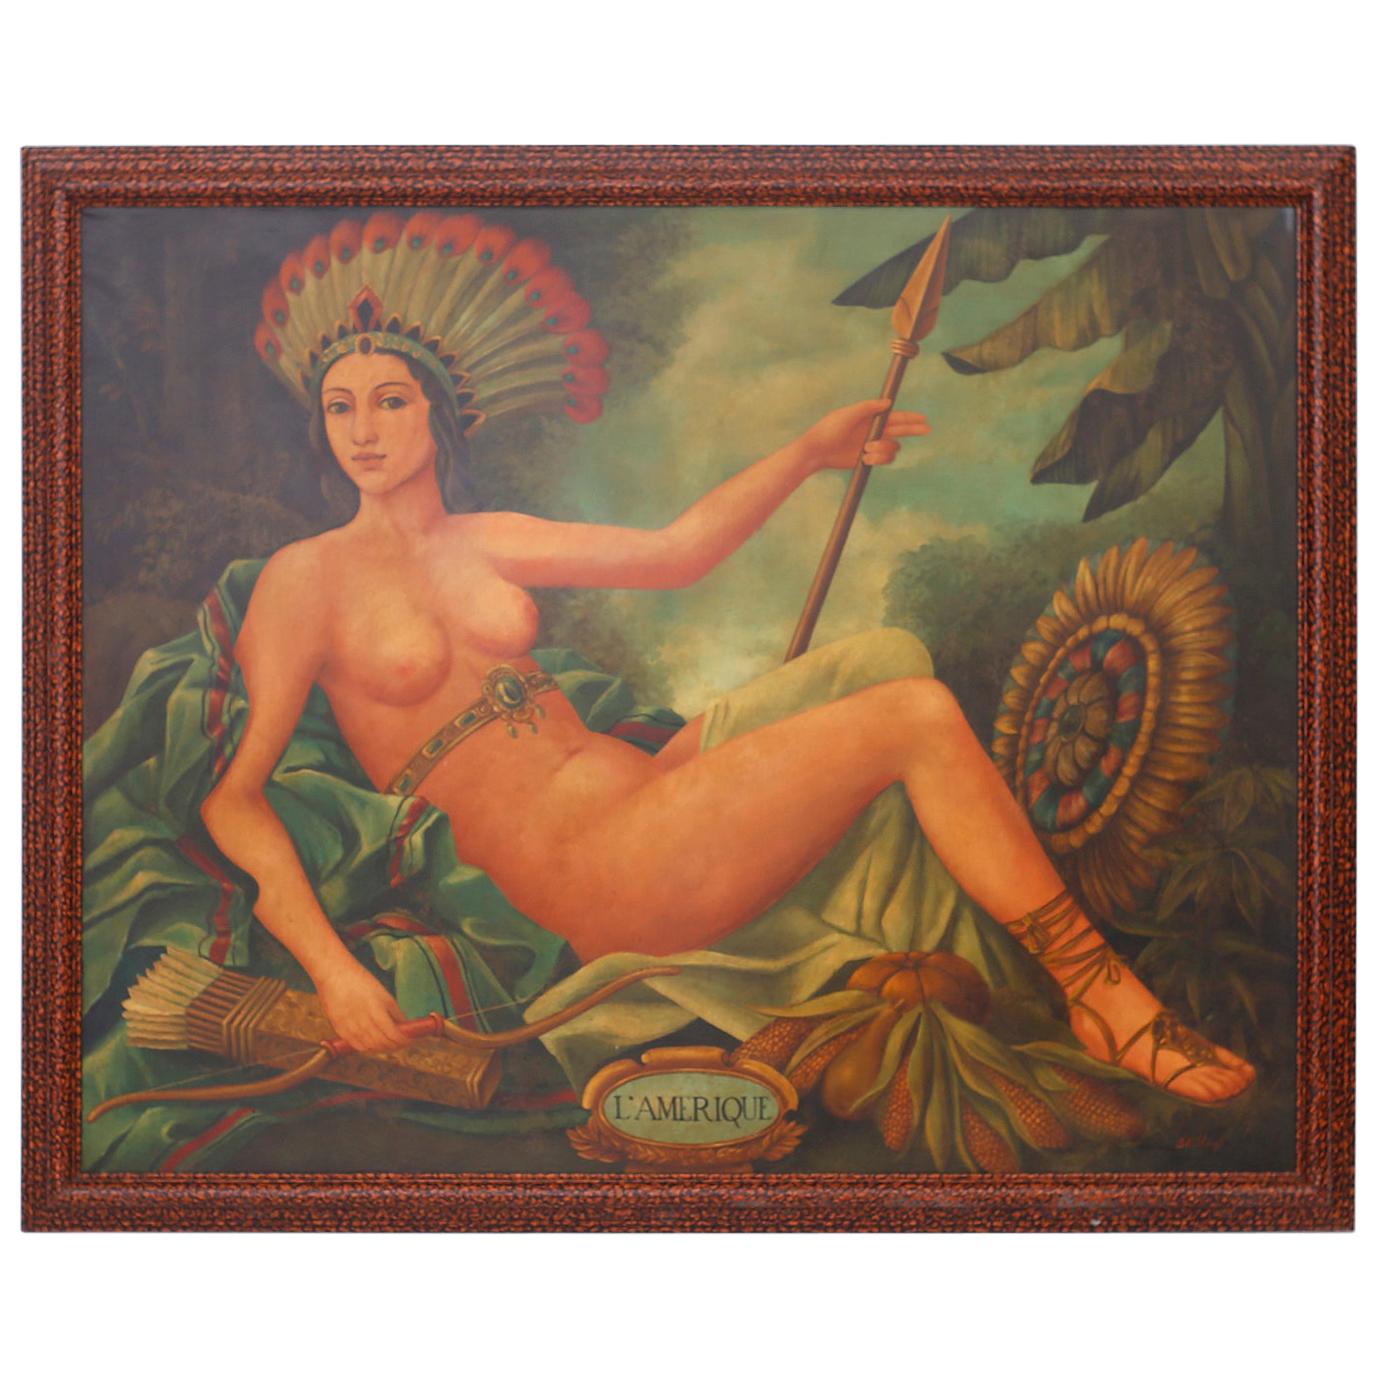 L'Amerique by Skilling, Depicting a Voluptuous Woman in a Woodland Setting